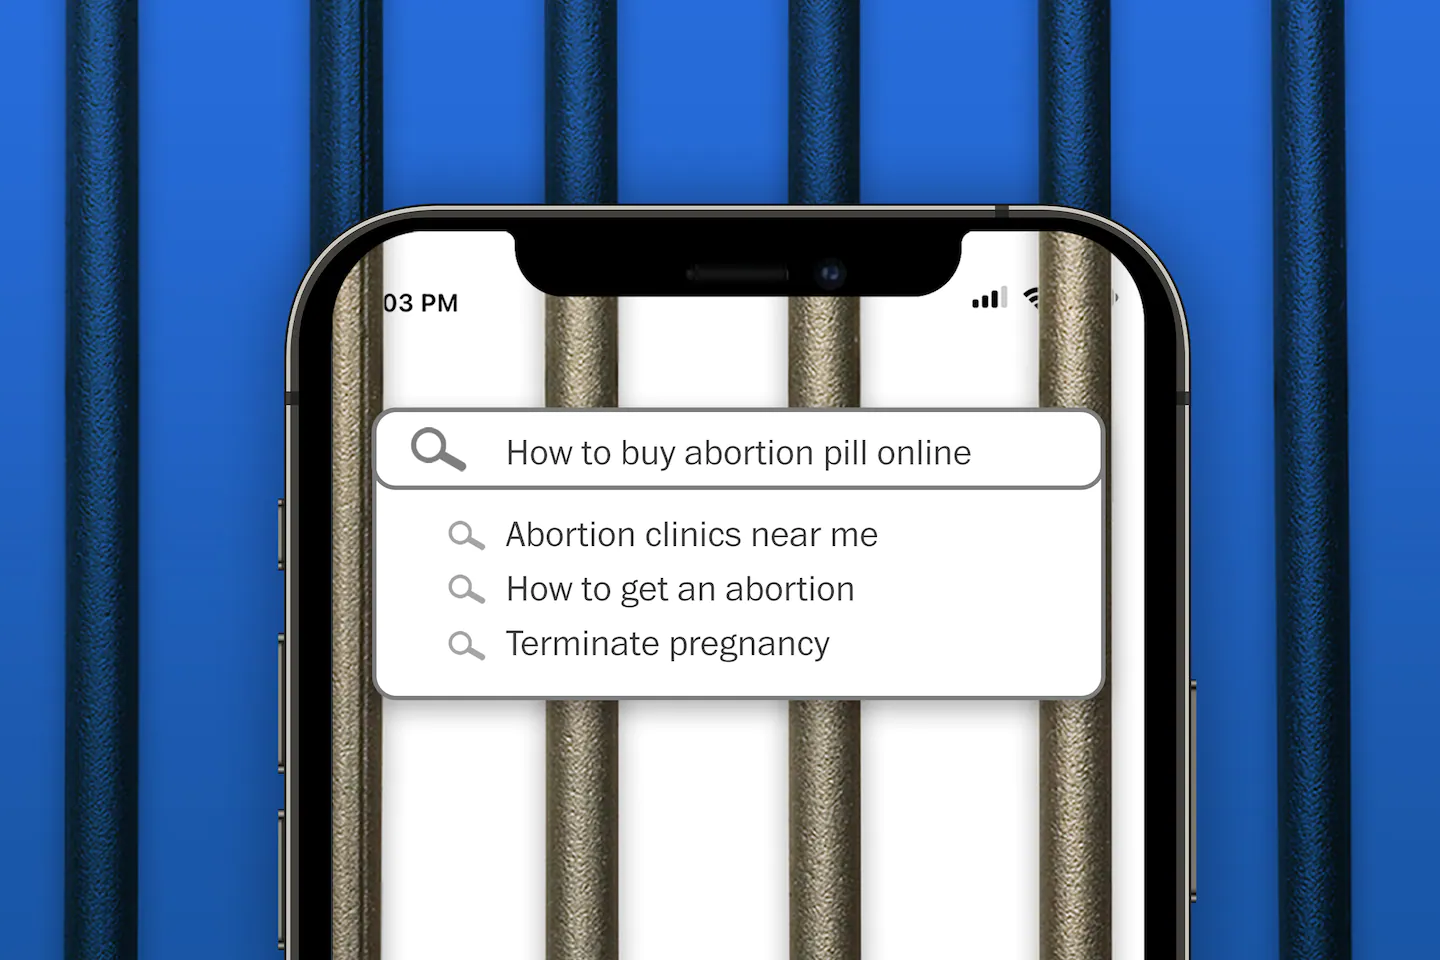 Police used texts, web searches for abortion to prosecute women